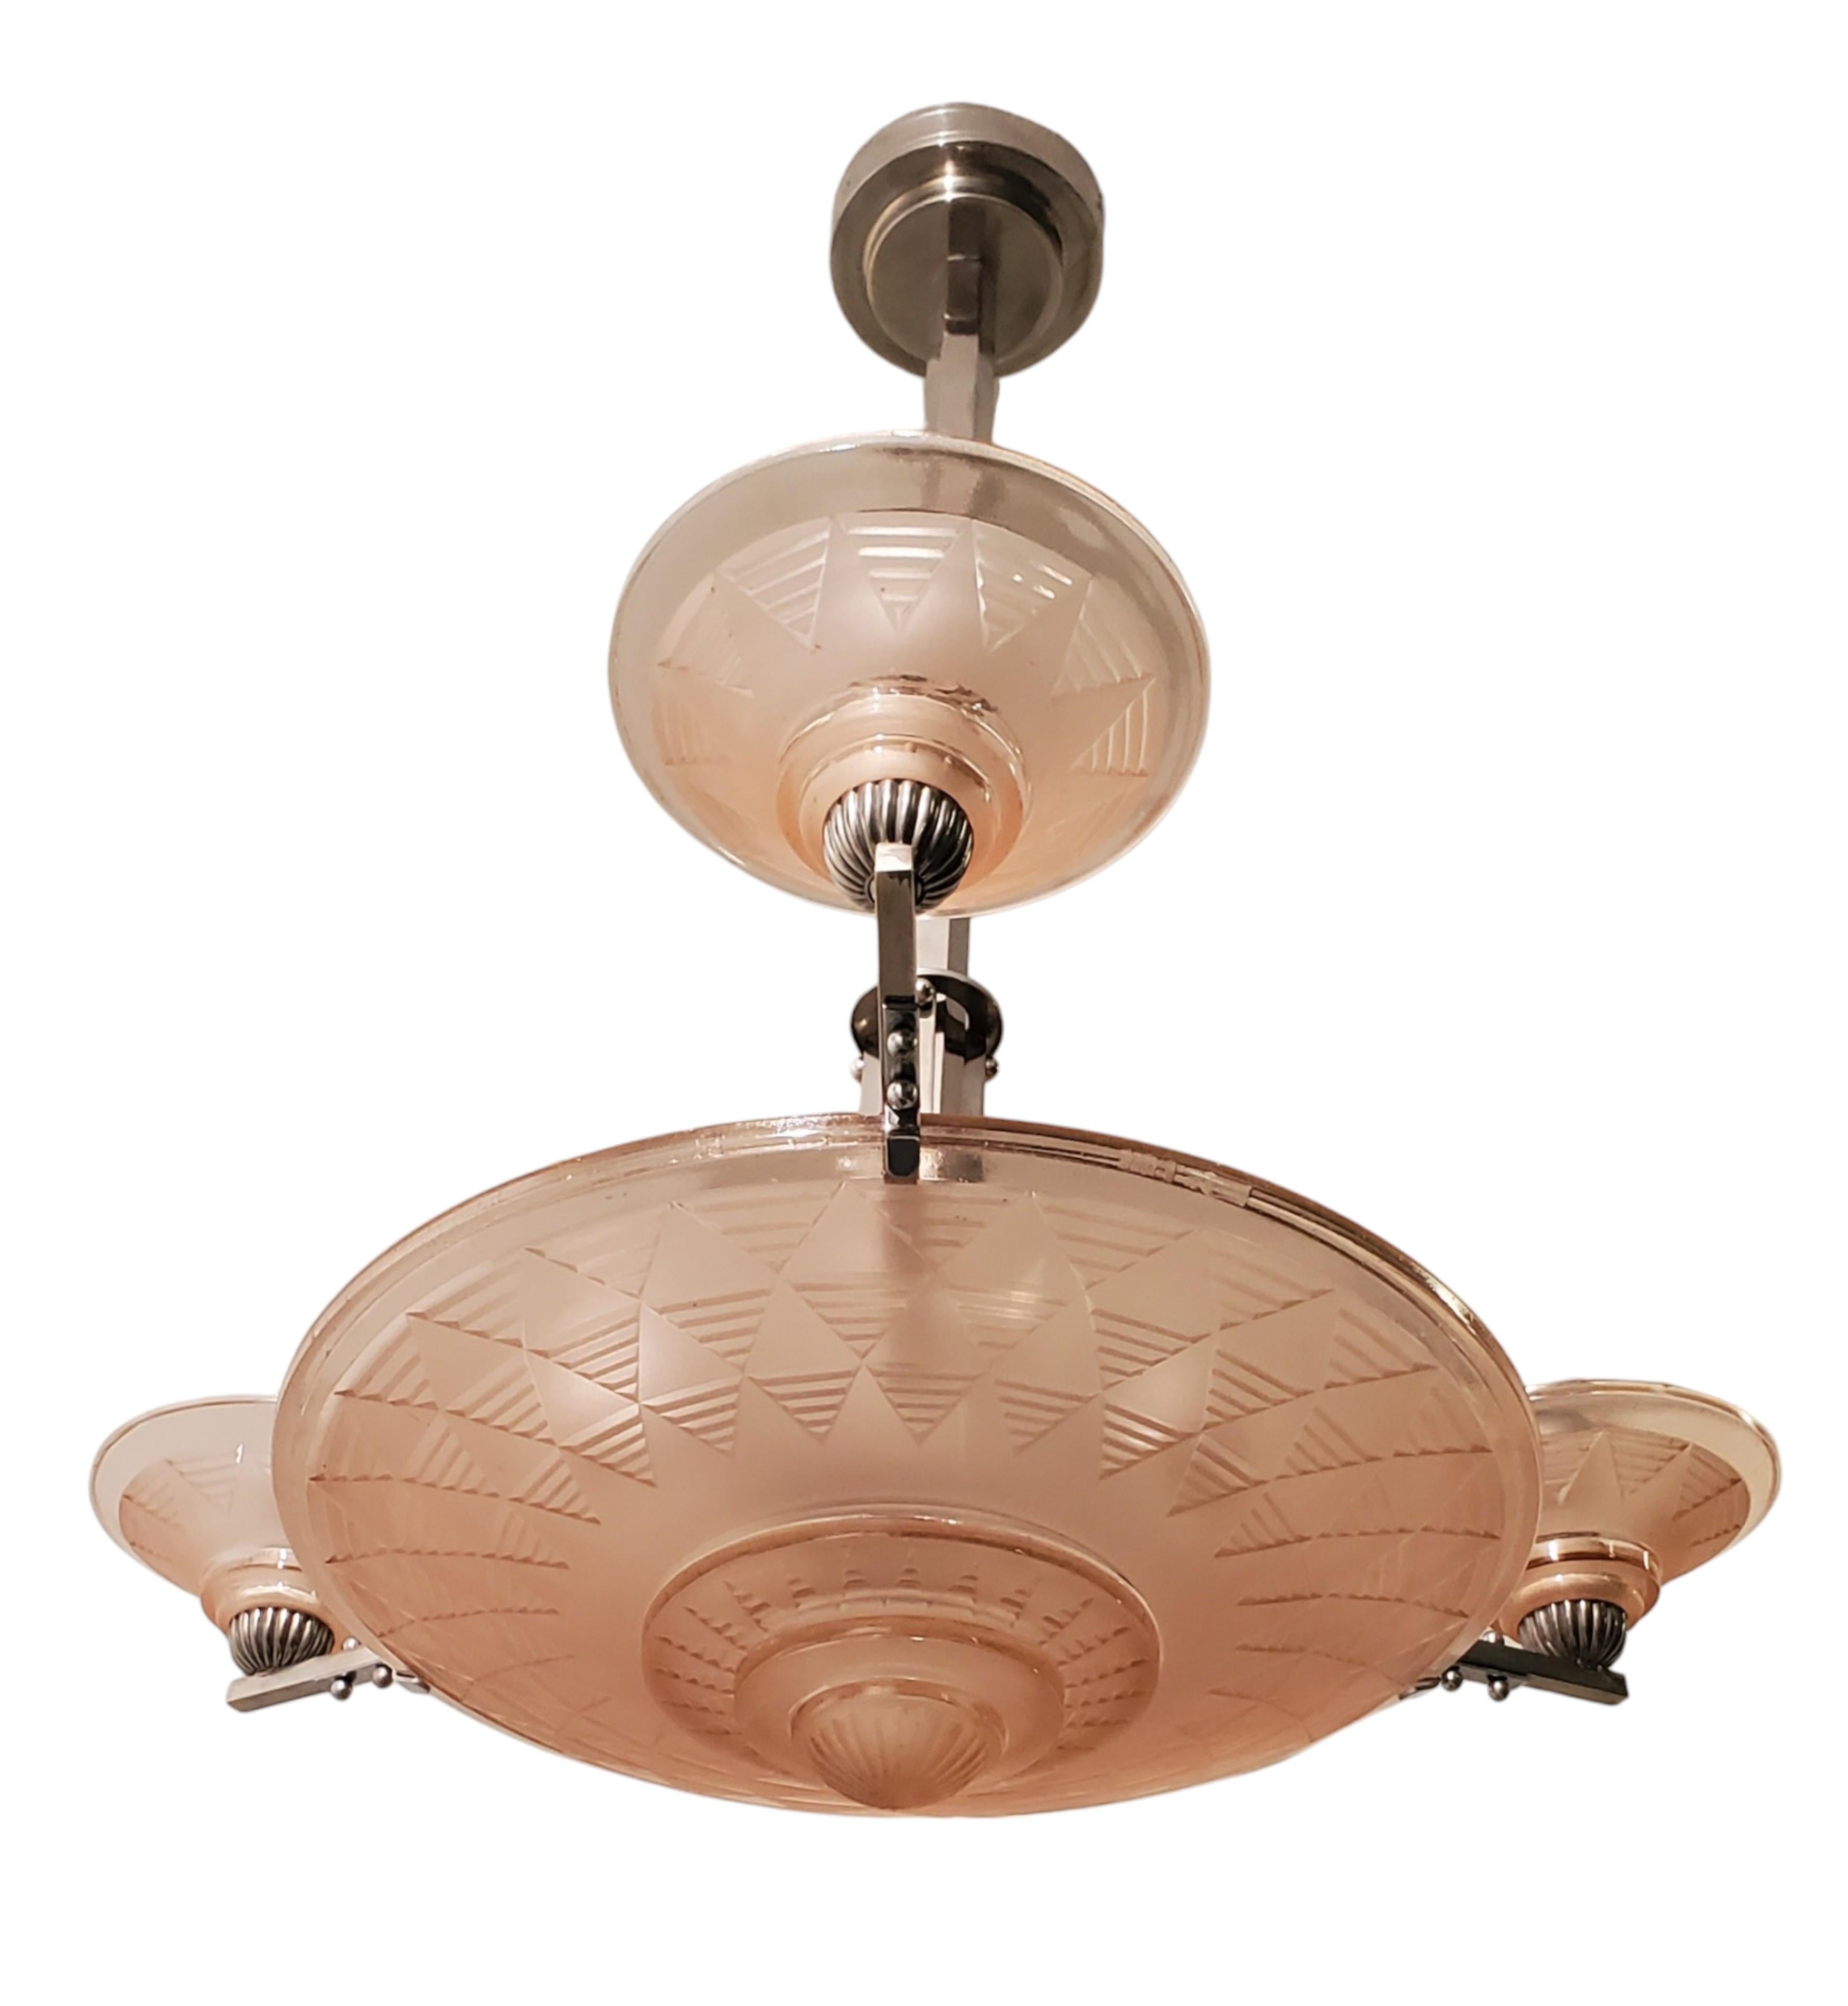 Petitot Art Deco peach /salmon /pink frosted glass + nickeled bronze chandelier For Sale 8